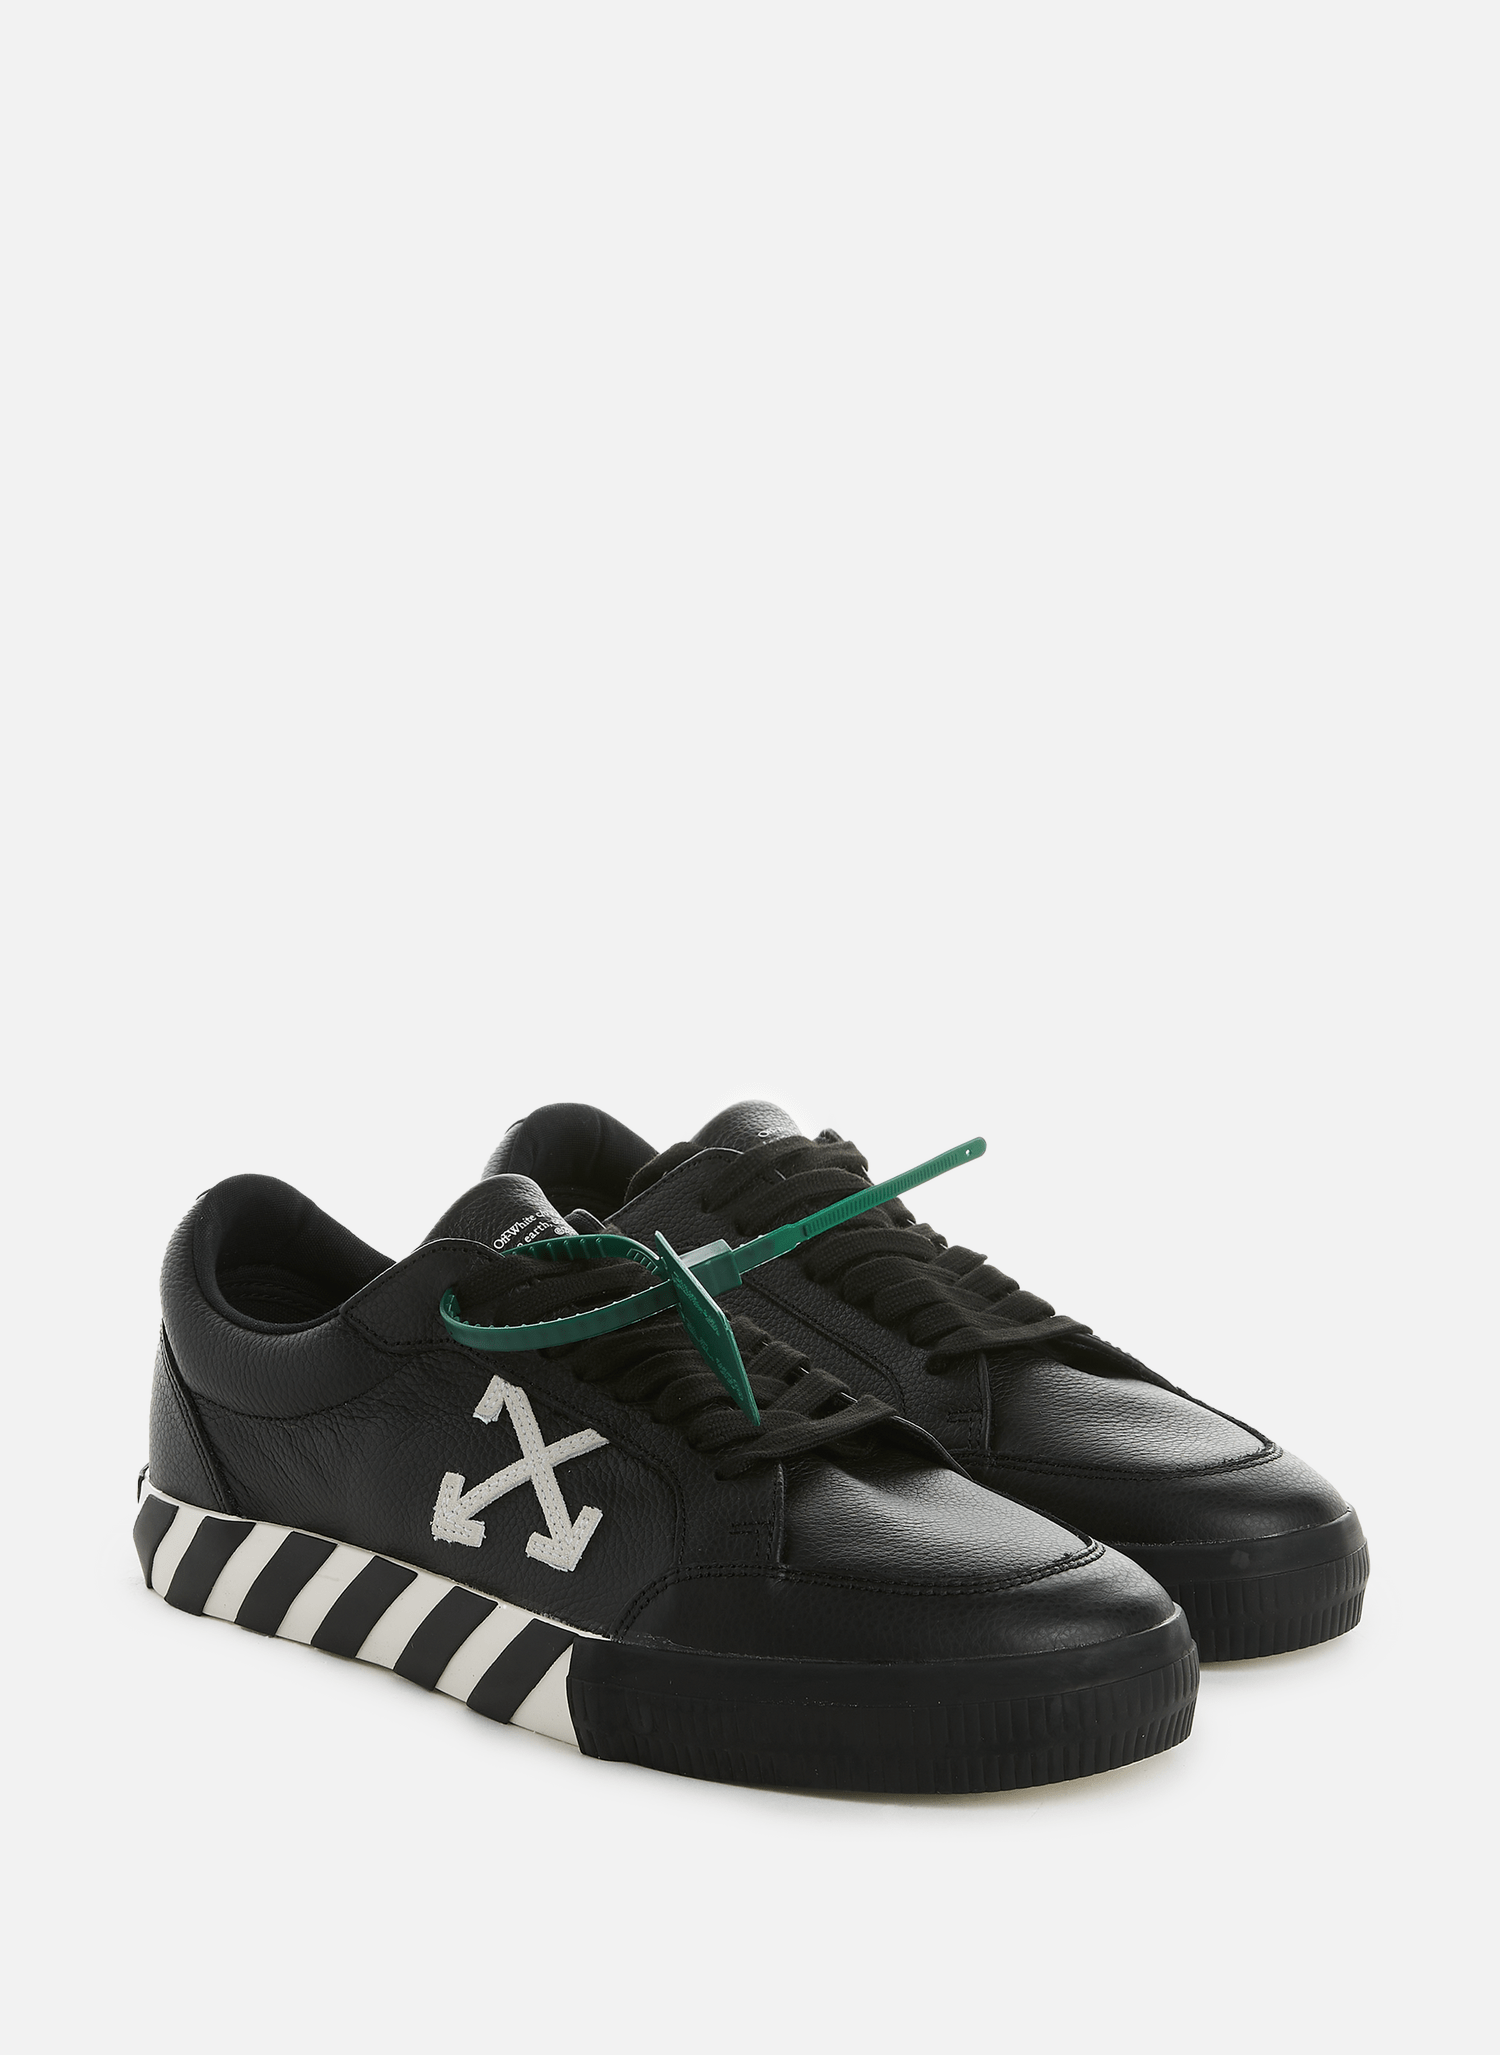 Off-White Vulcanised Leather Trainers - Black & White - Escape Menswear